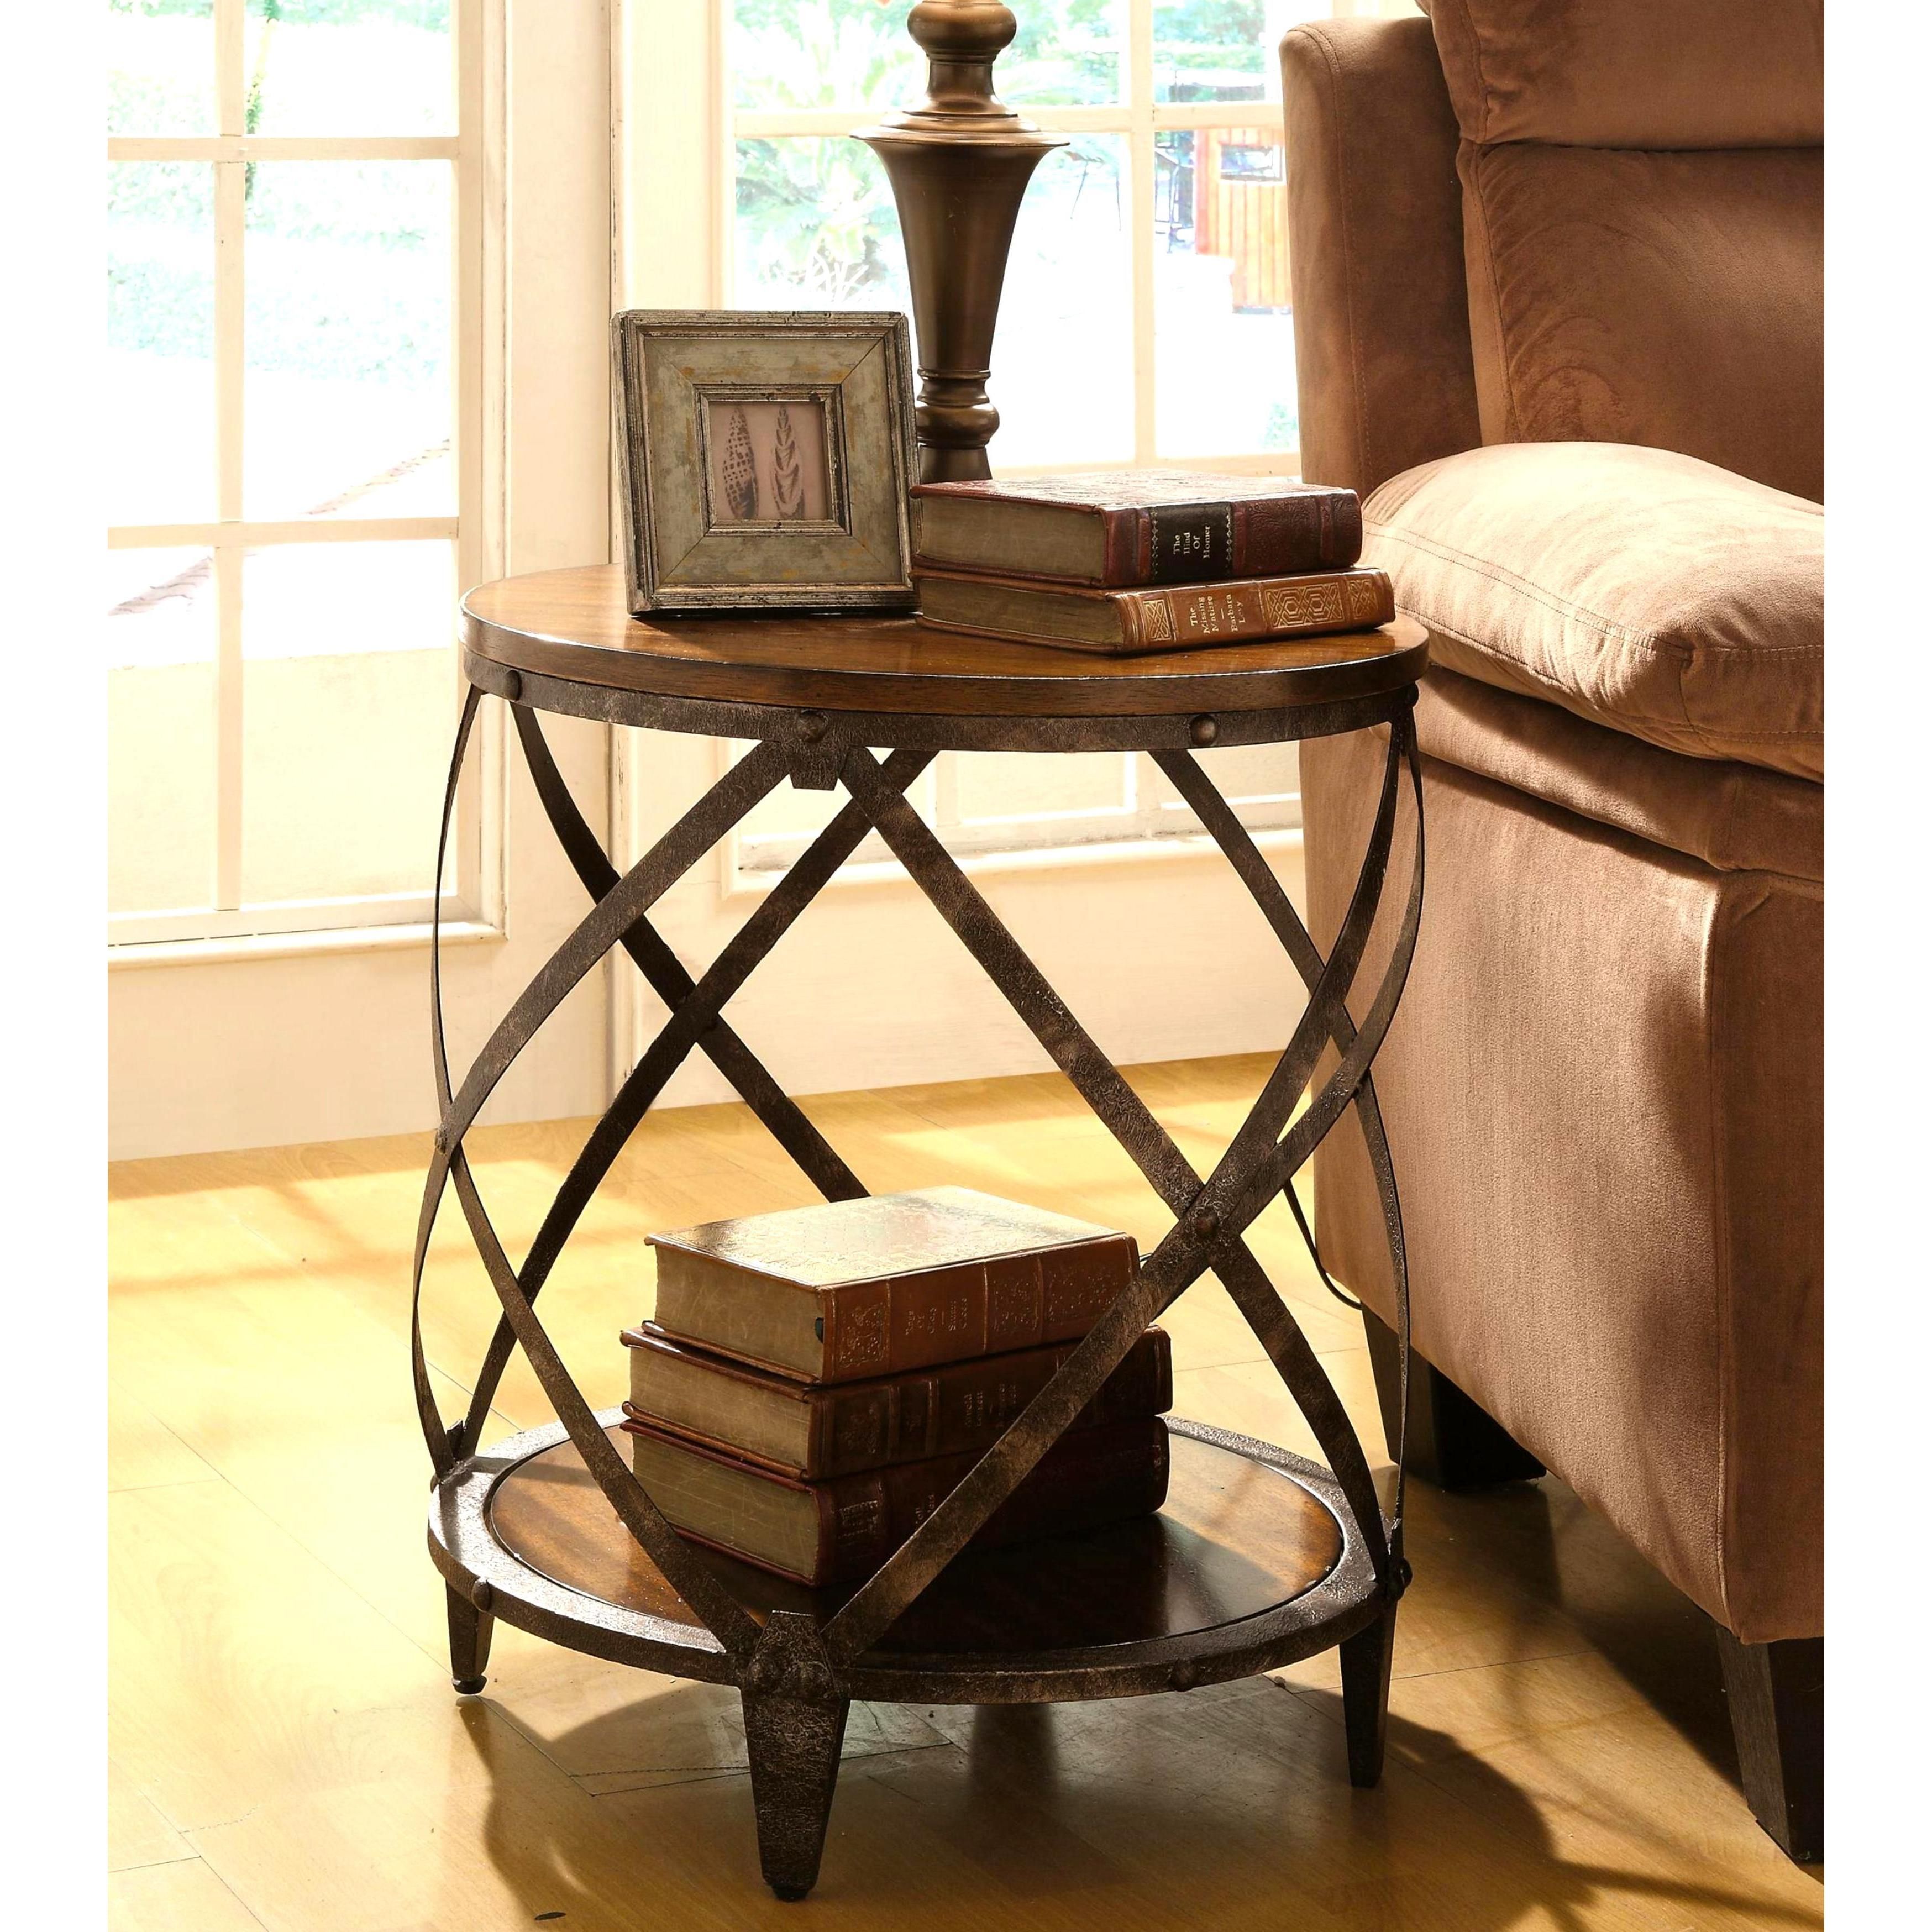 give your home contemporary and industrial appeal with this accent round wood metal table constructed distressed frame drum shape features white living room cabinet nate berkus